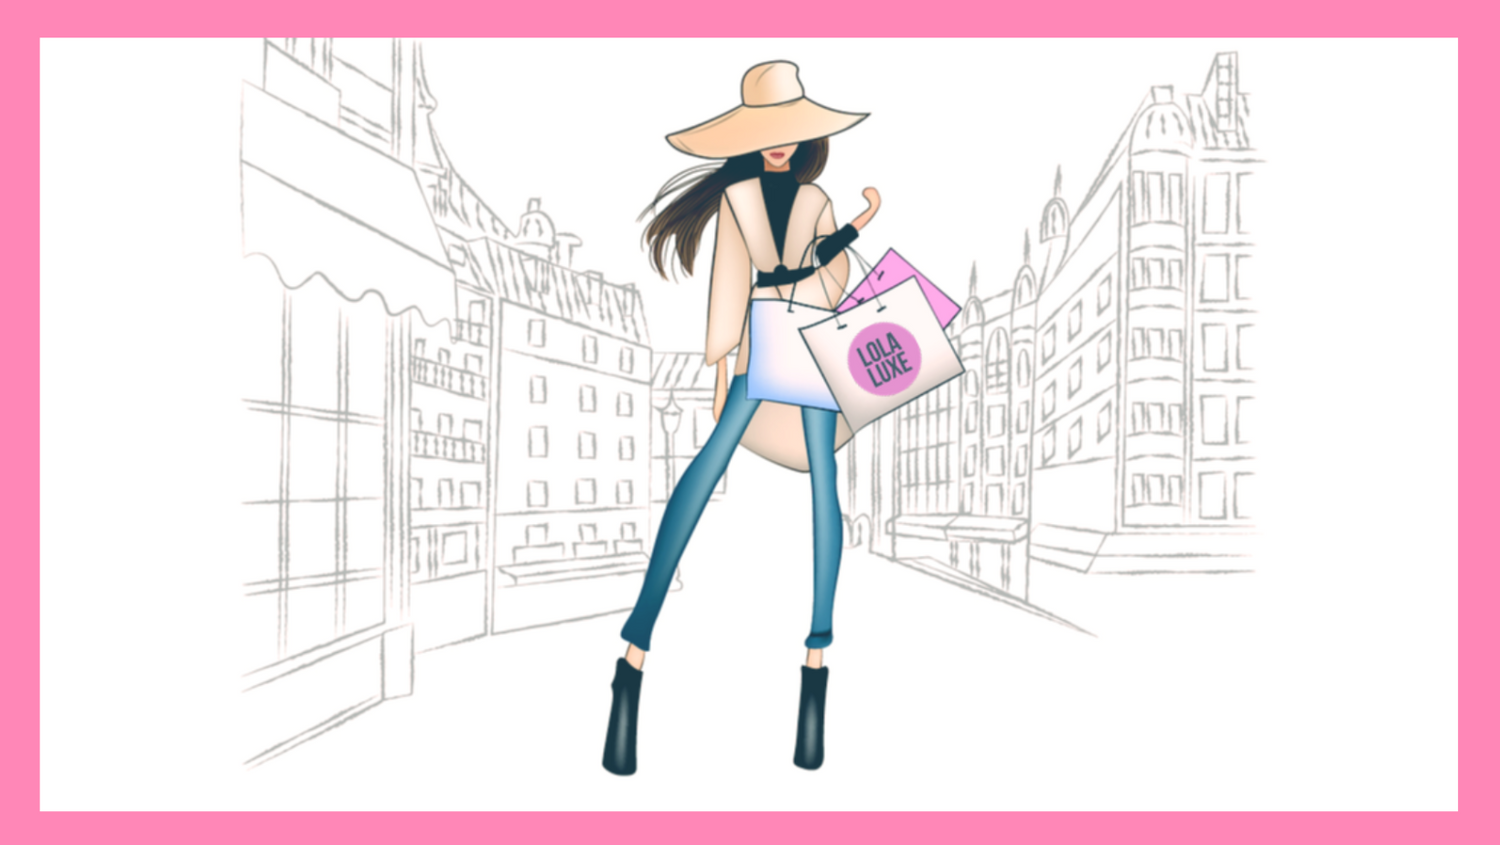 LOLA LUXE SHOP illustration of a young woman with long brunette hair blowing in the wind with a floppy brim light beige hat on, a tan car coat with a belt, skinny blue jeans and black ankle boots with a pink border.